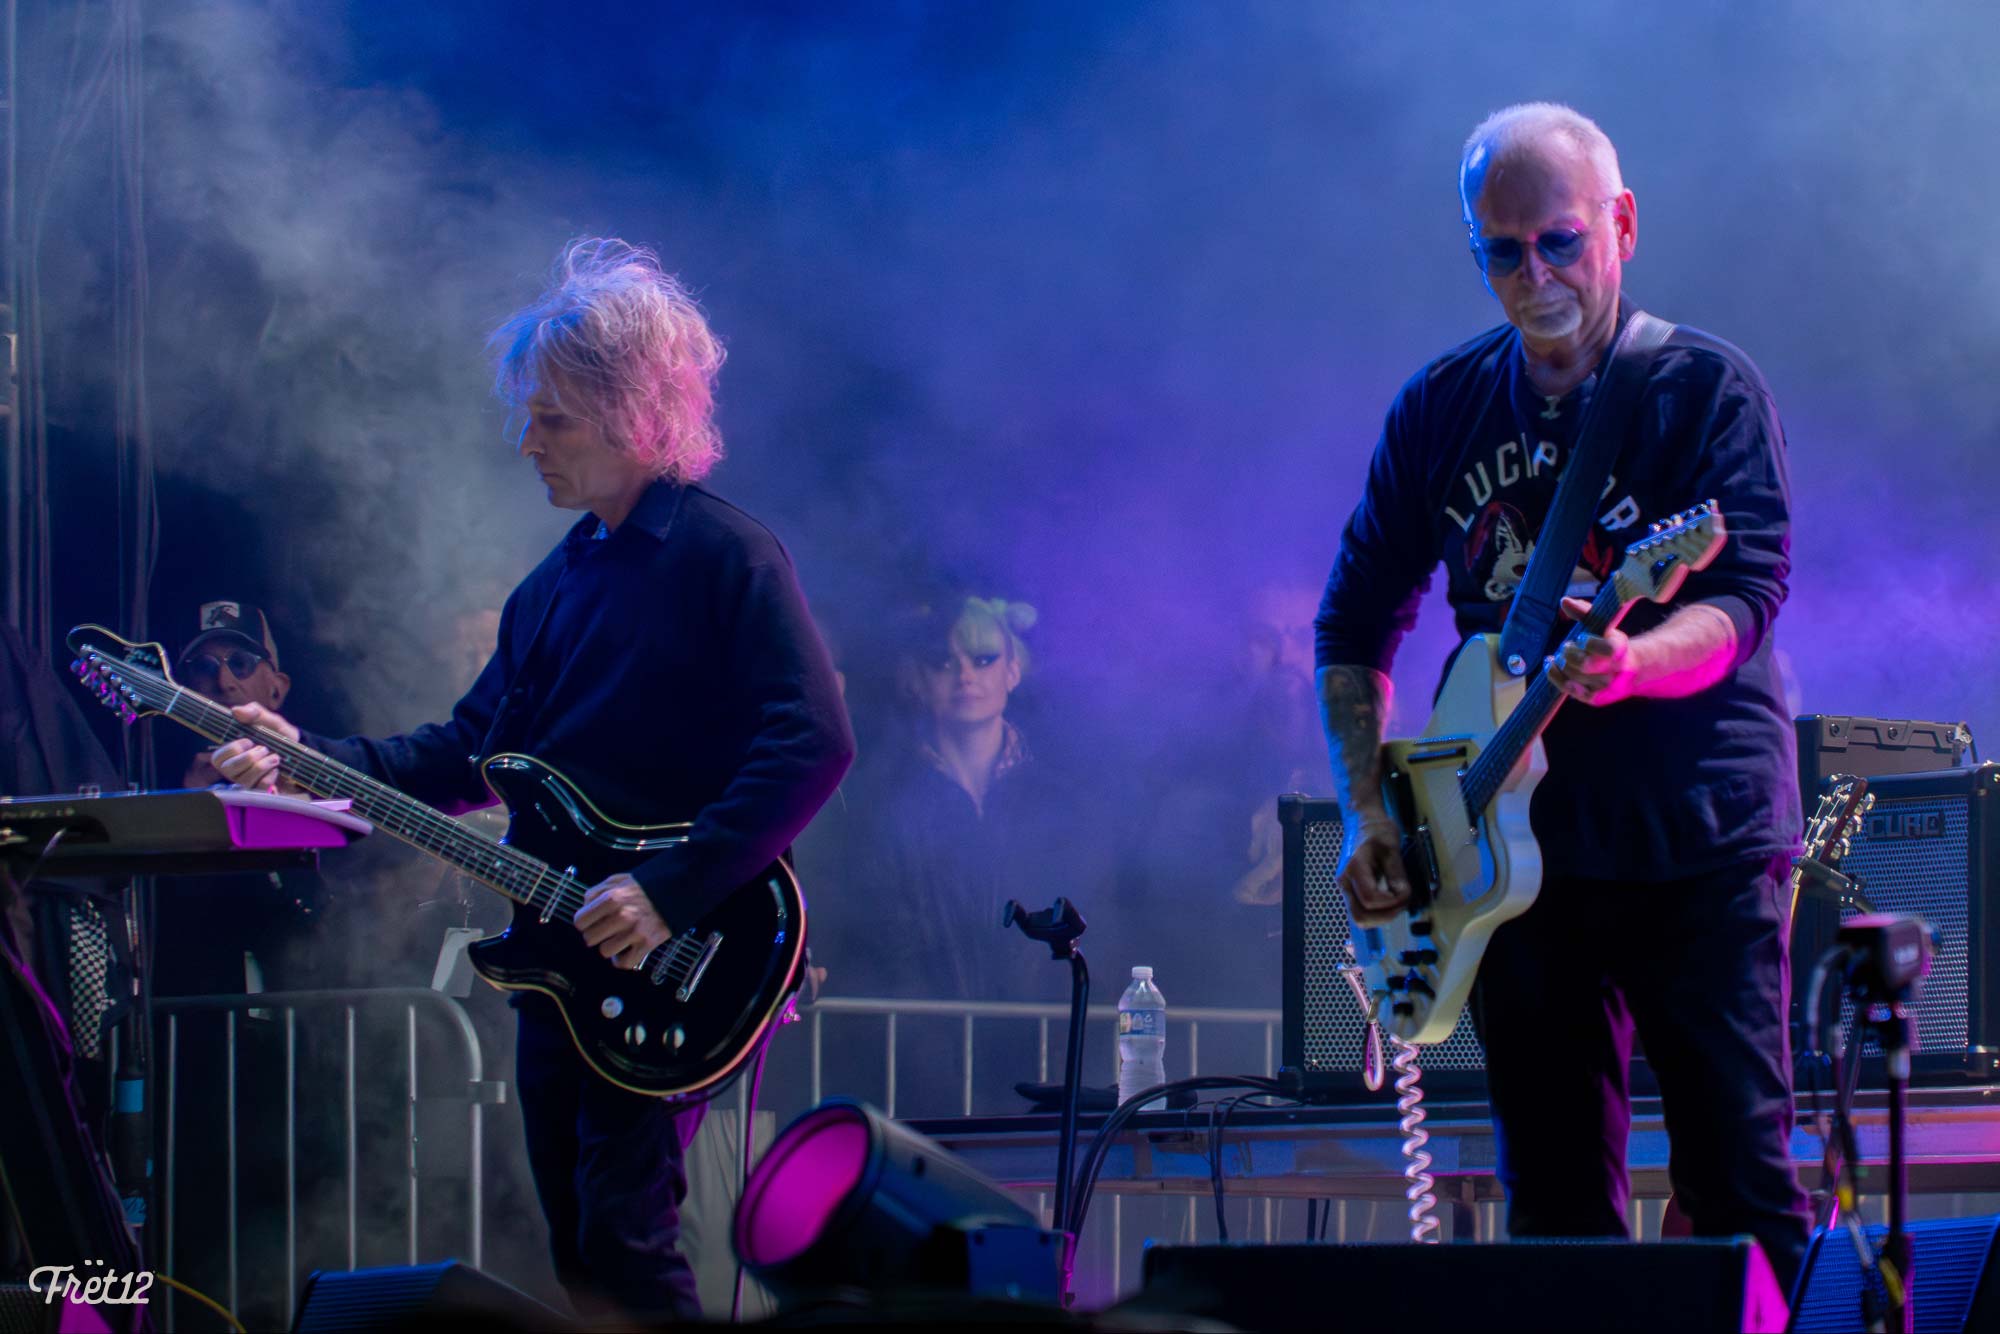 The Cure at Riot Fest - Photos by FRET12